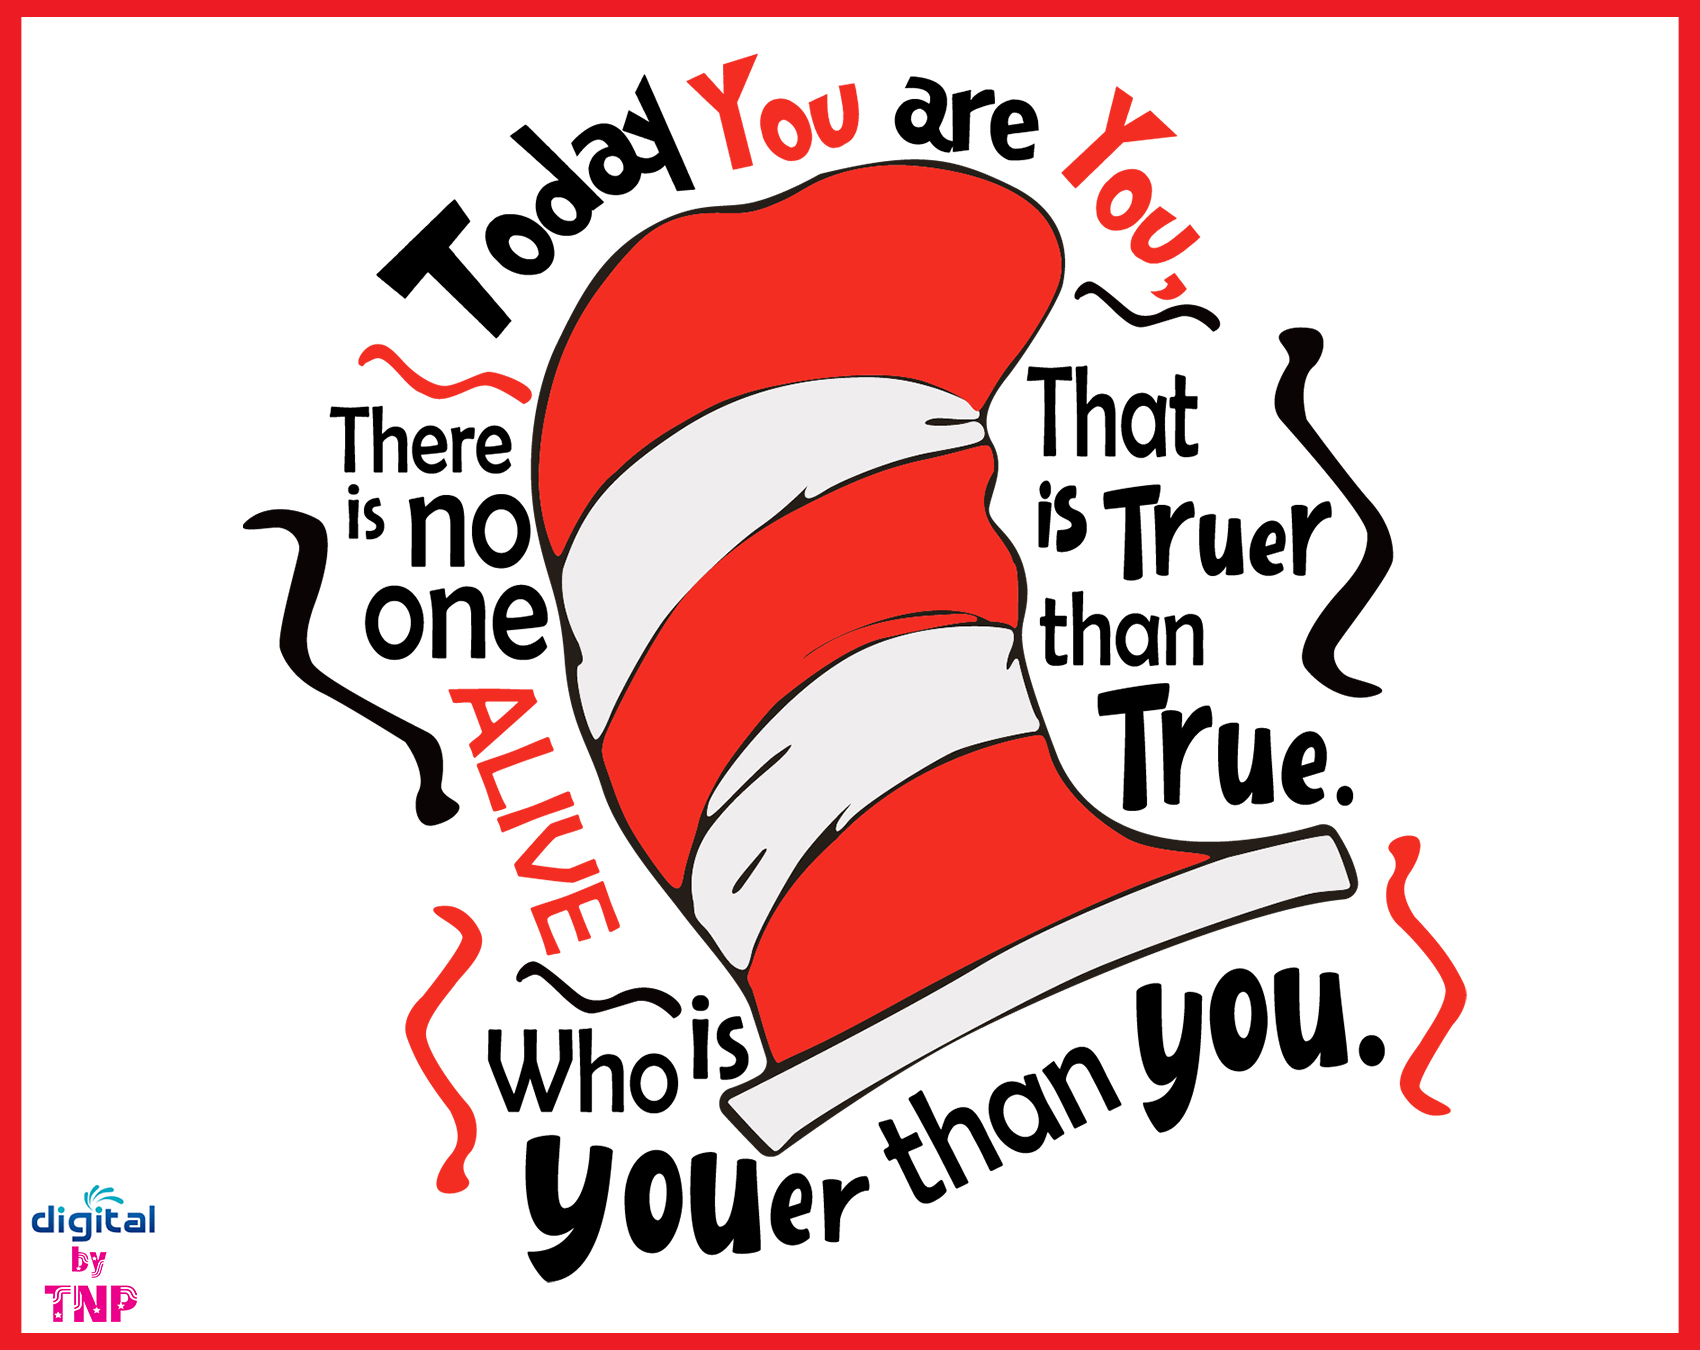 B, For read across america SVG, Dr Seuss 2020 svg, png, dxf, eps, pdf